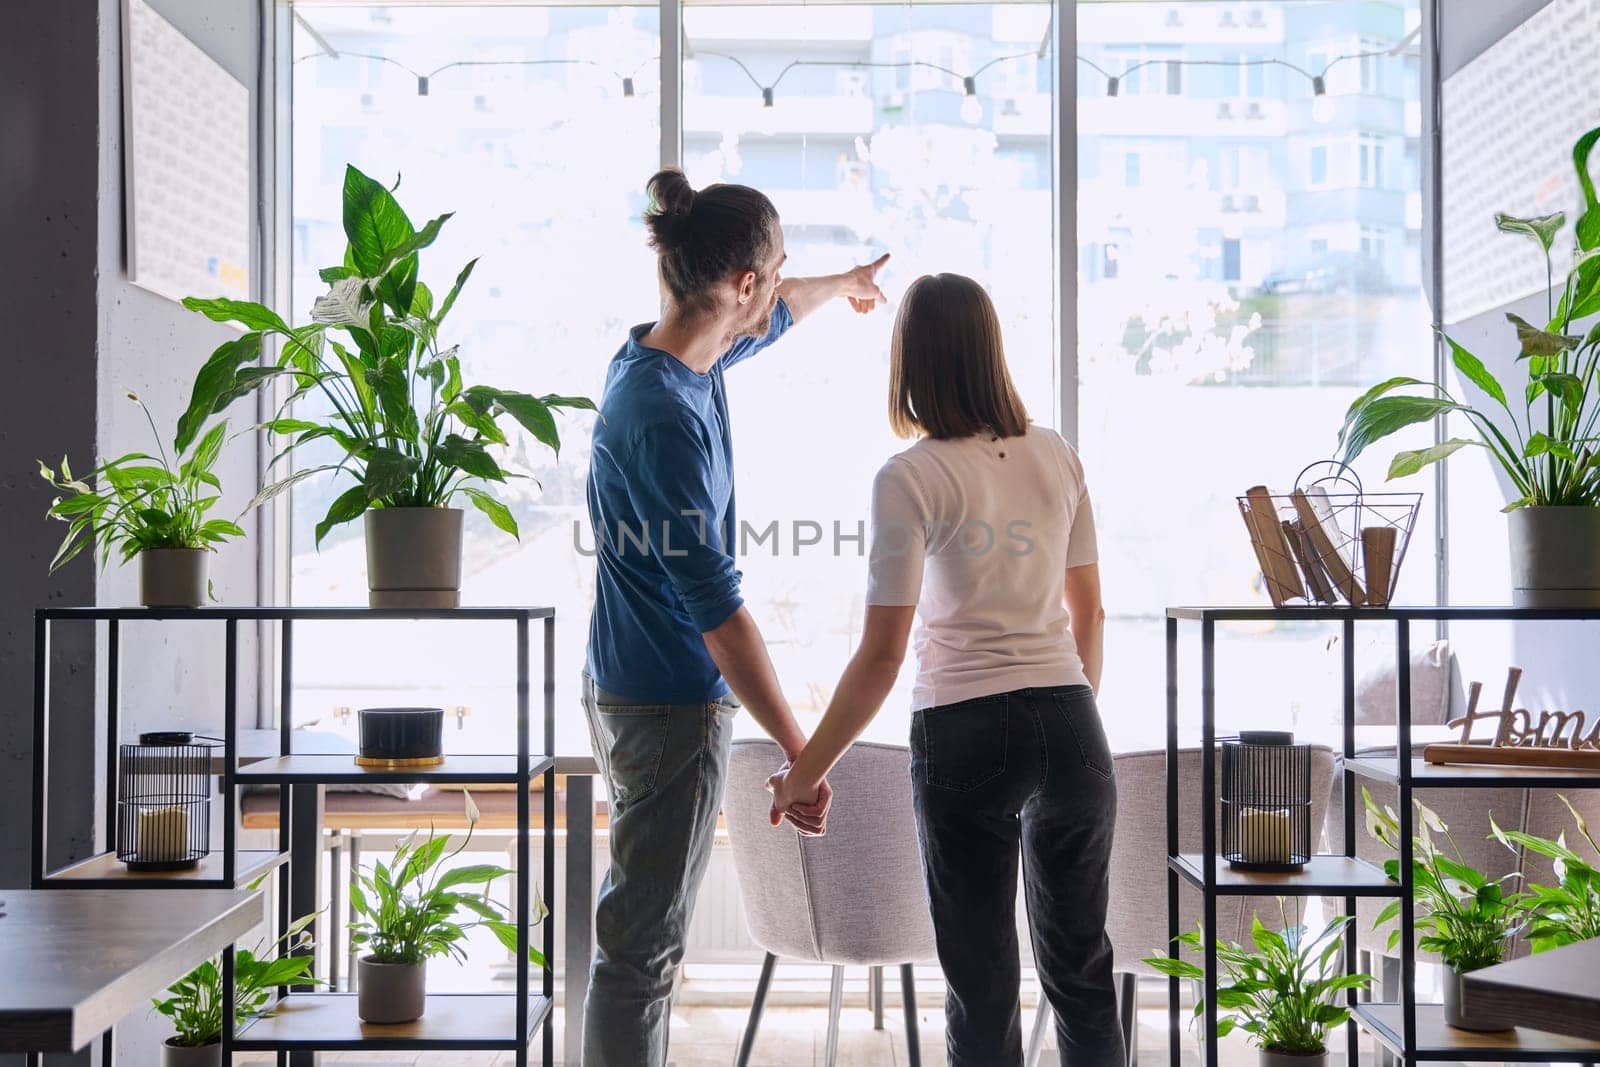 Back view, silhouette of young couple holding hands looking out window. Love friendship romance relationship, happiness, lifestyle, people concept